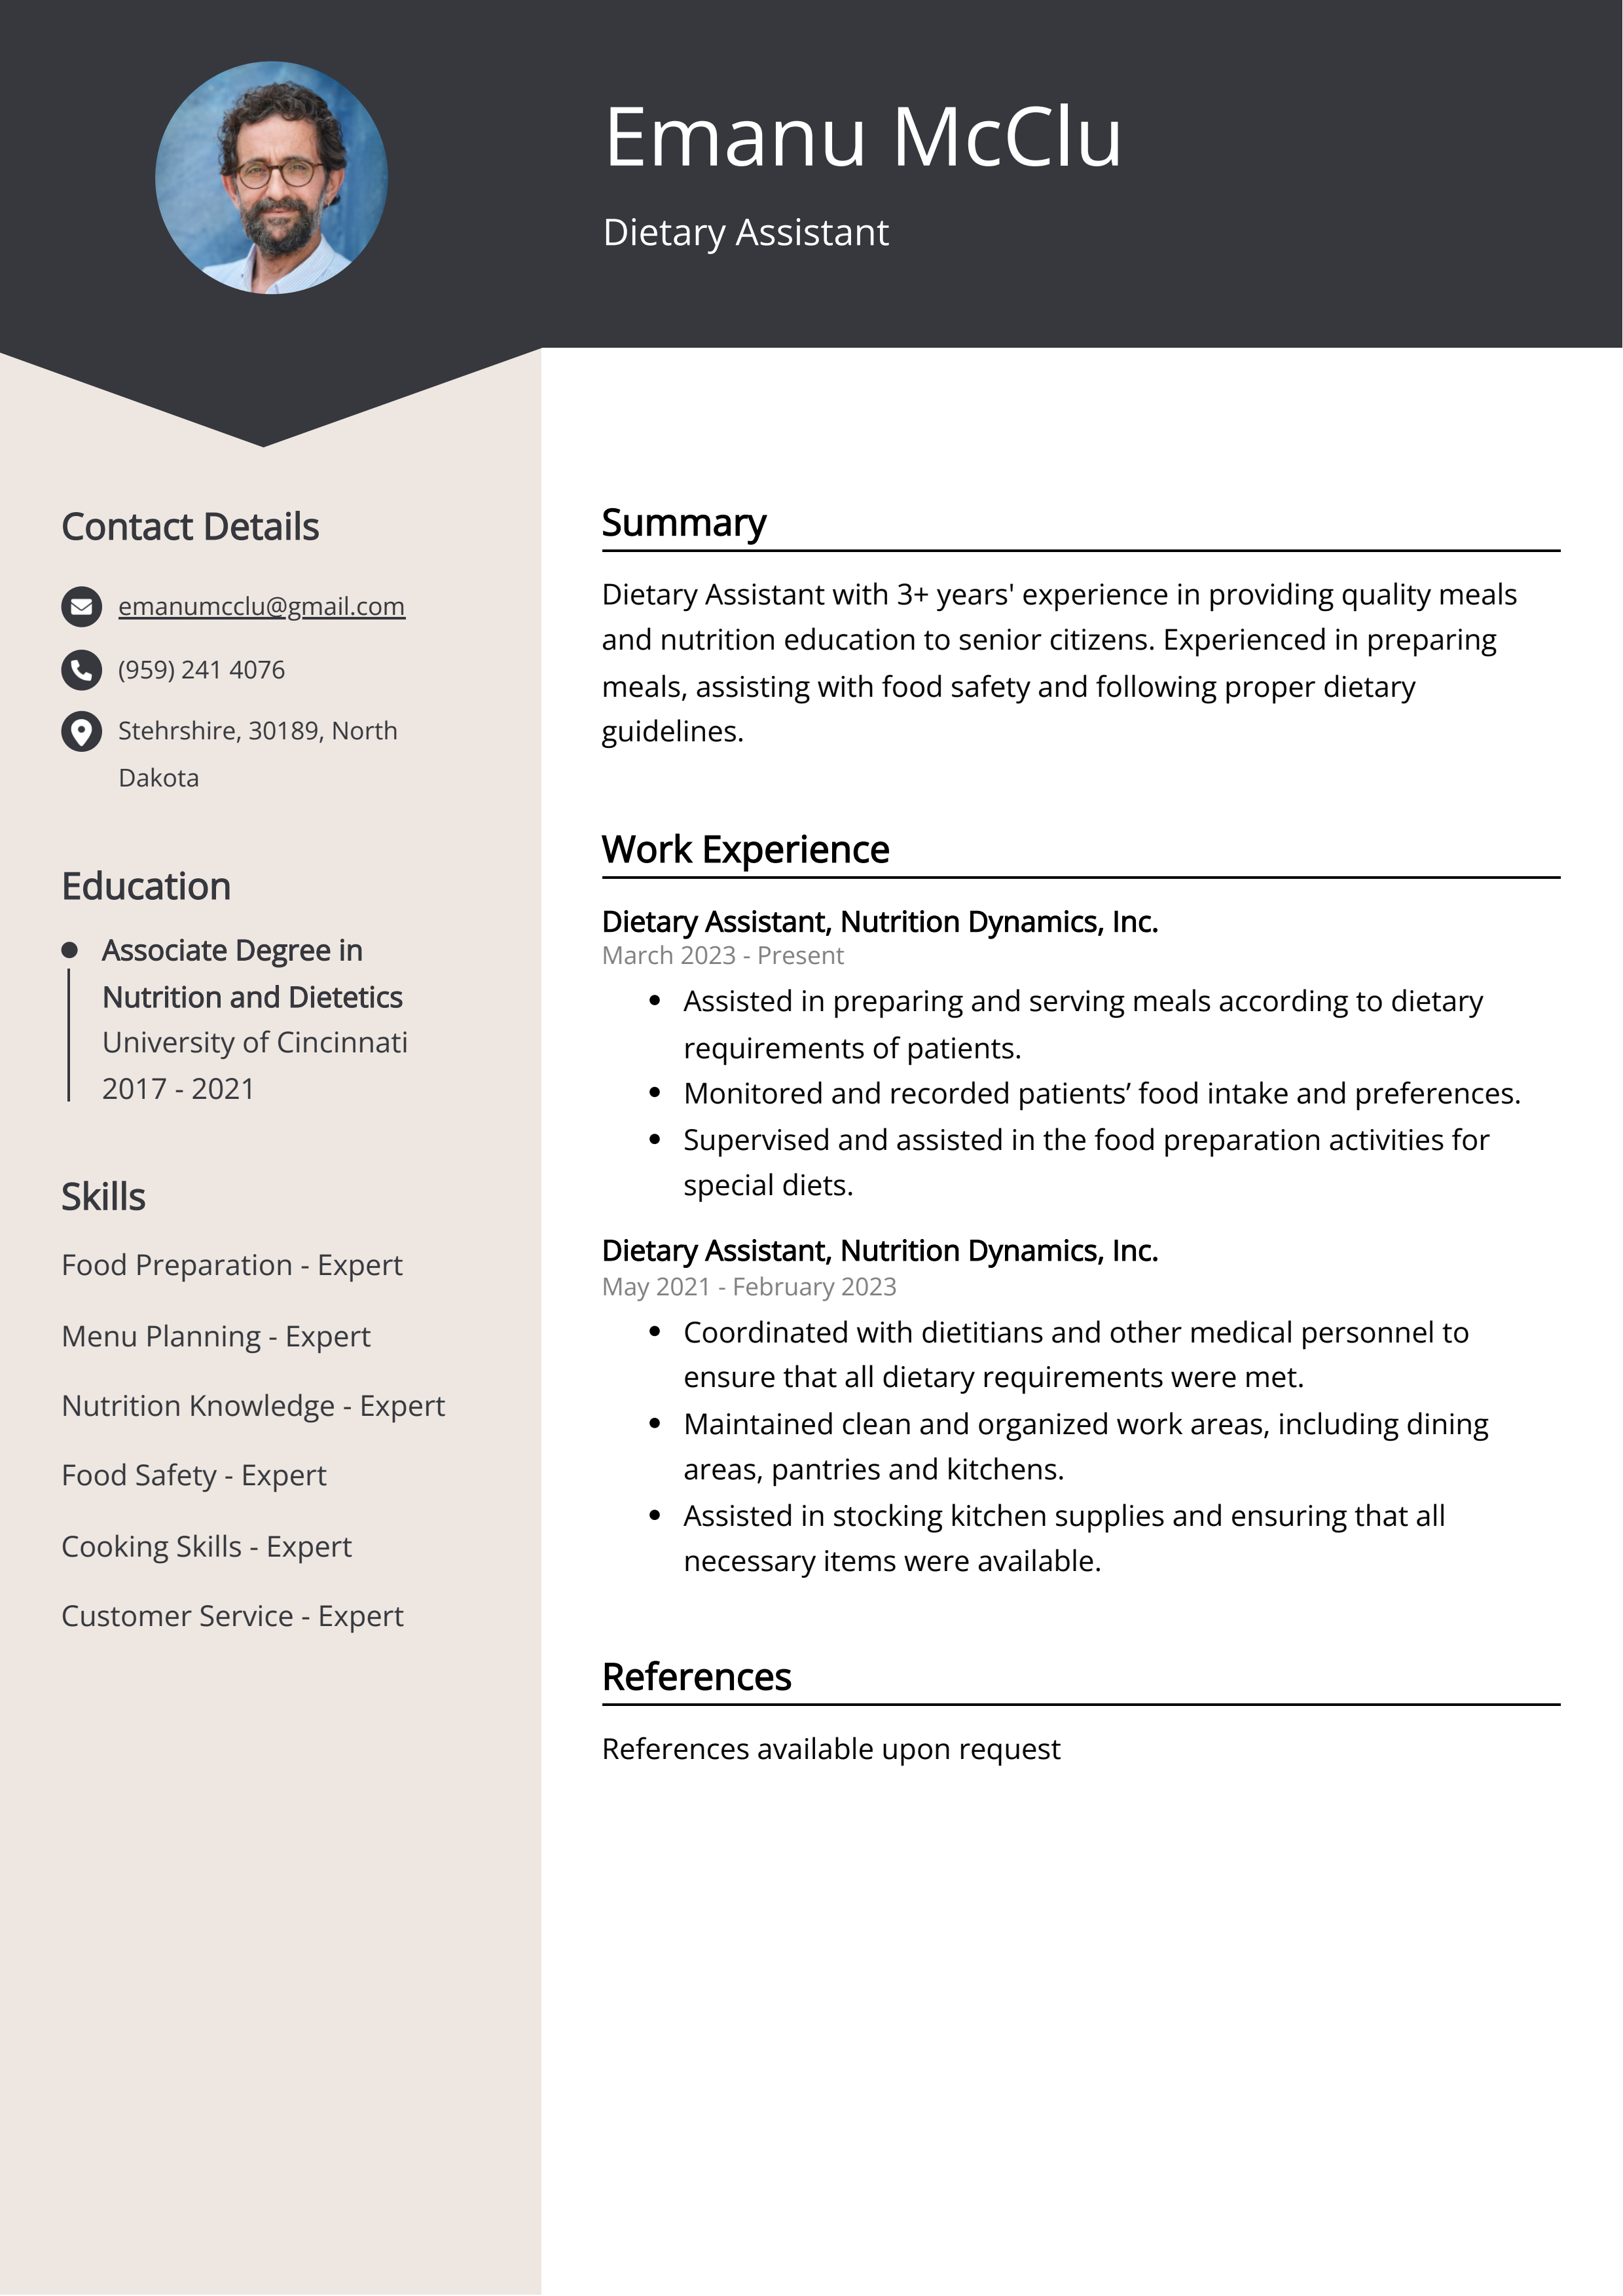 Dietary Assistant CV Example